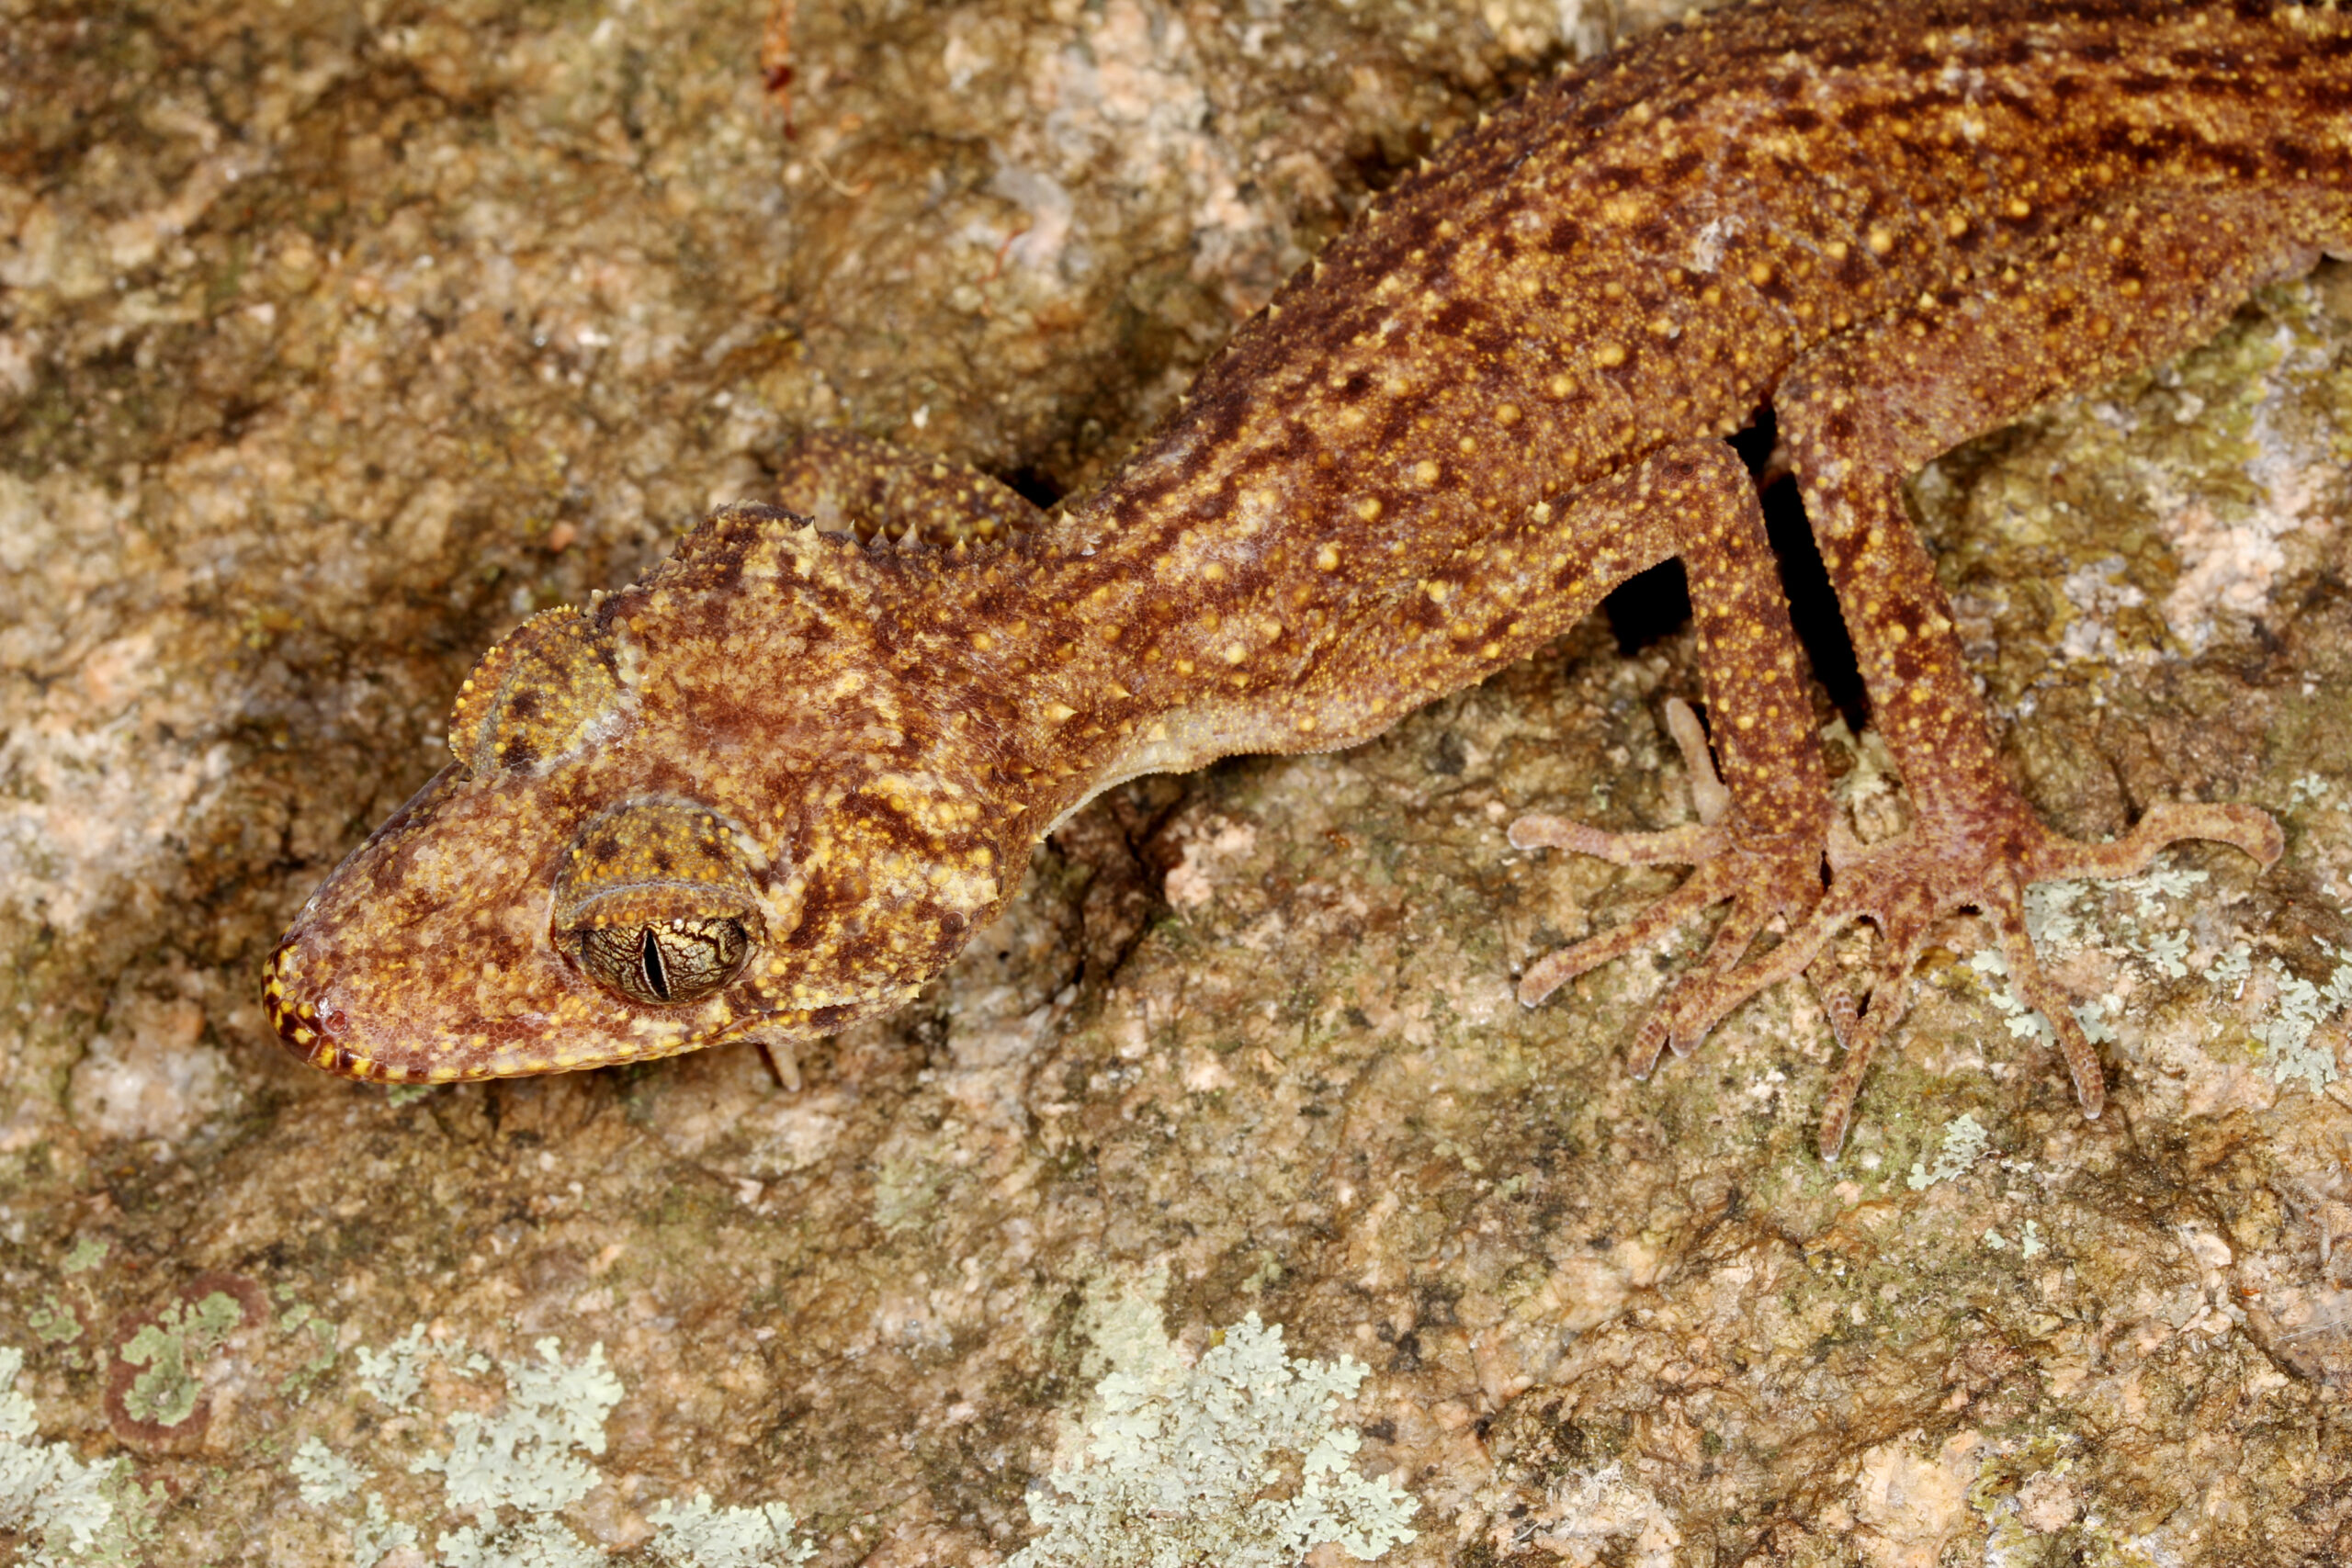 Master of camouflage: new gecko species found living among rocks on remote Queensland island - Australian Geographic